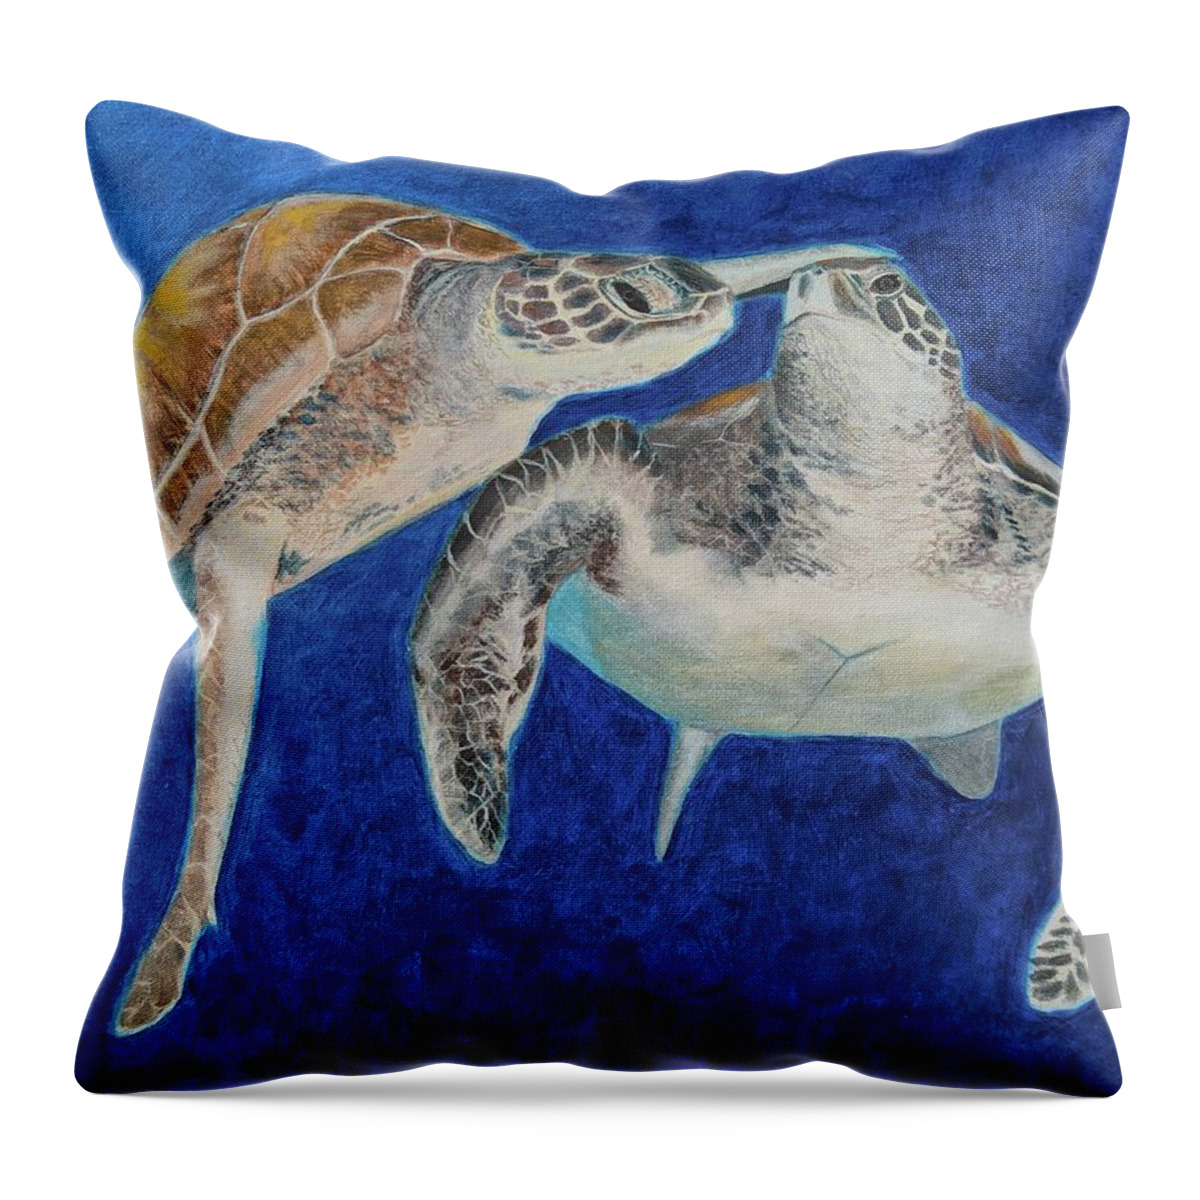 Sea Turtles Throw Pillow featuring the painting Turtle Honeymoon by Mike Jenkins